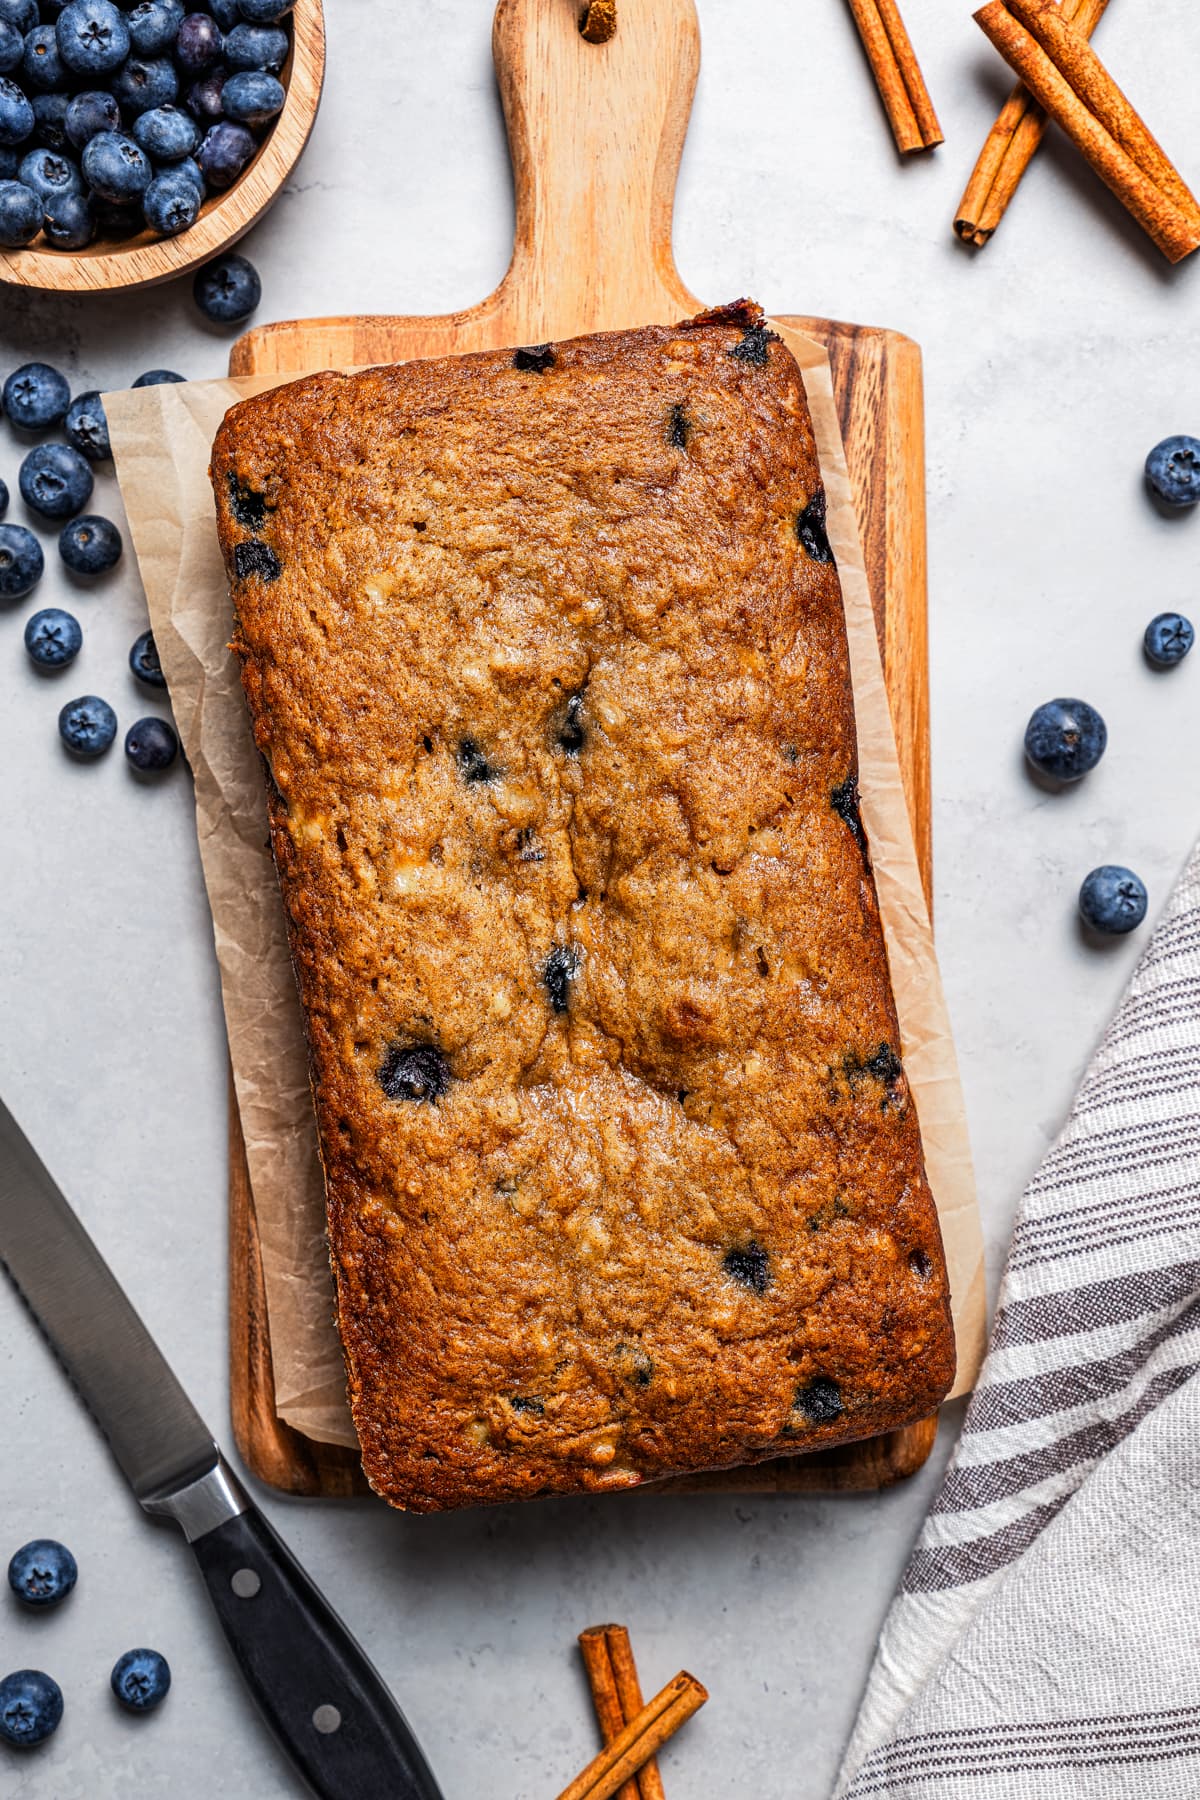 Overhead view of blueberry banana bread on a wooden board, surrounded by scattered blueberries.